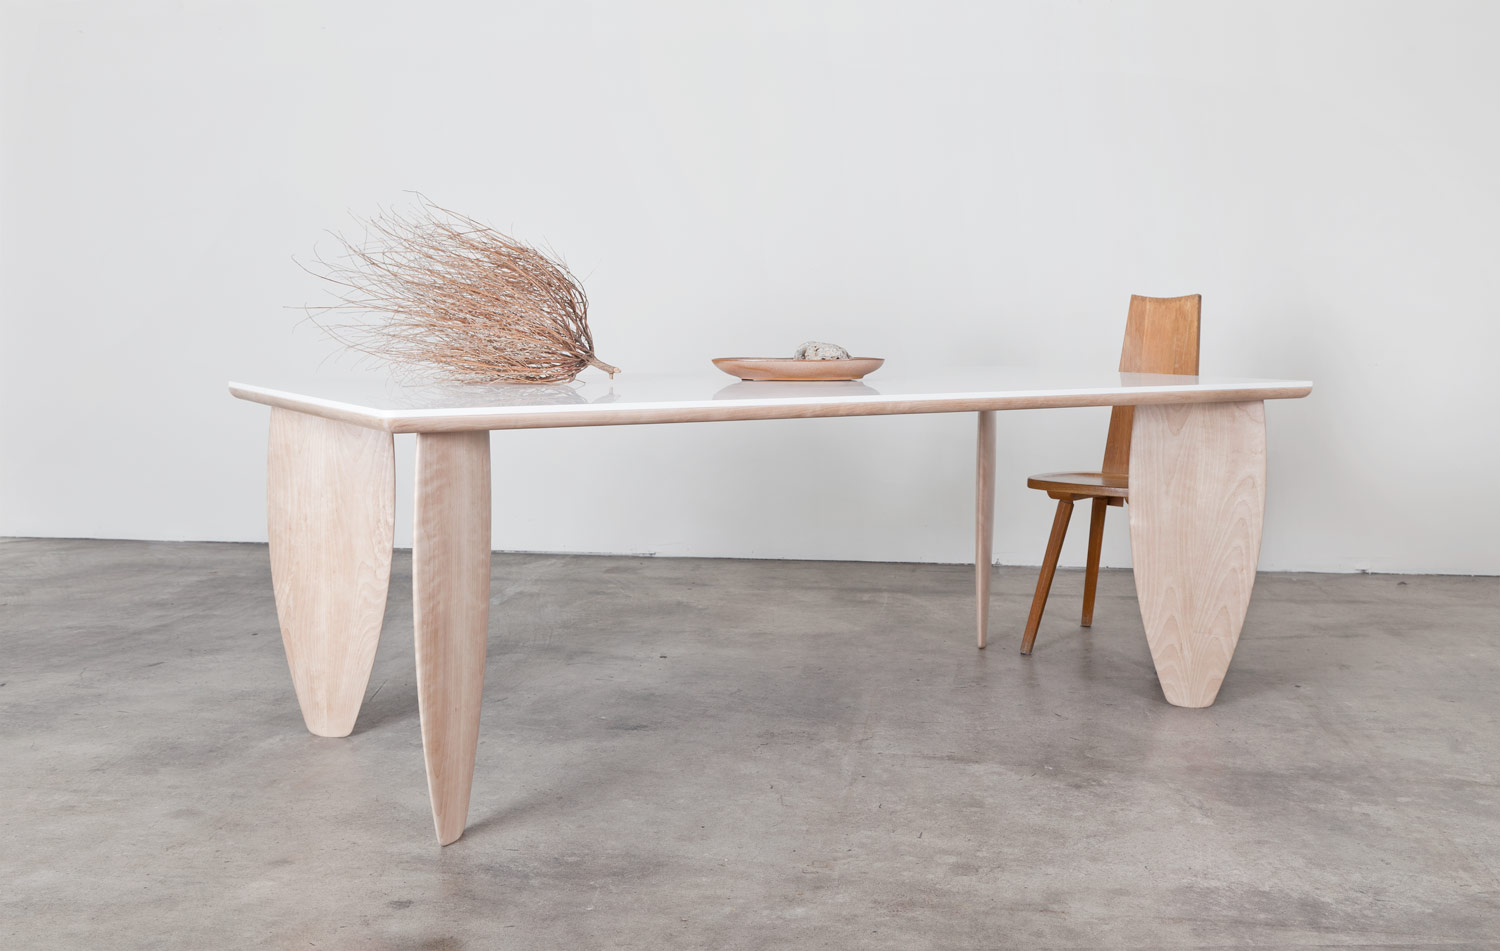 Surfboard table by Early Work | Flodeau.com